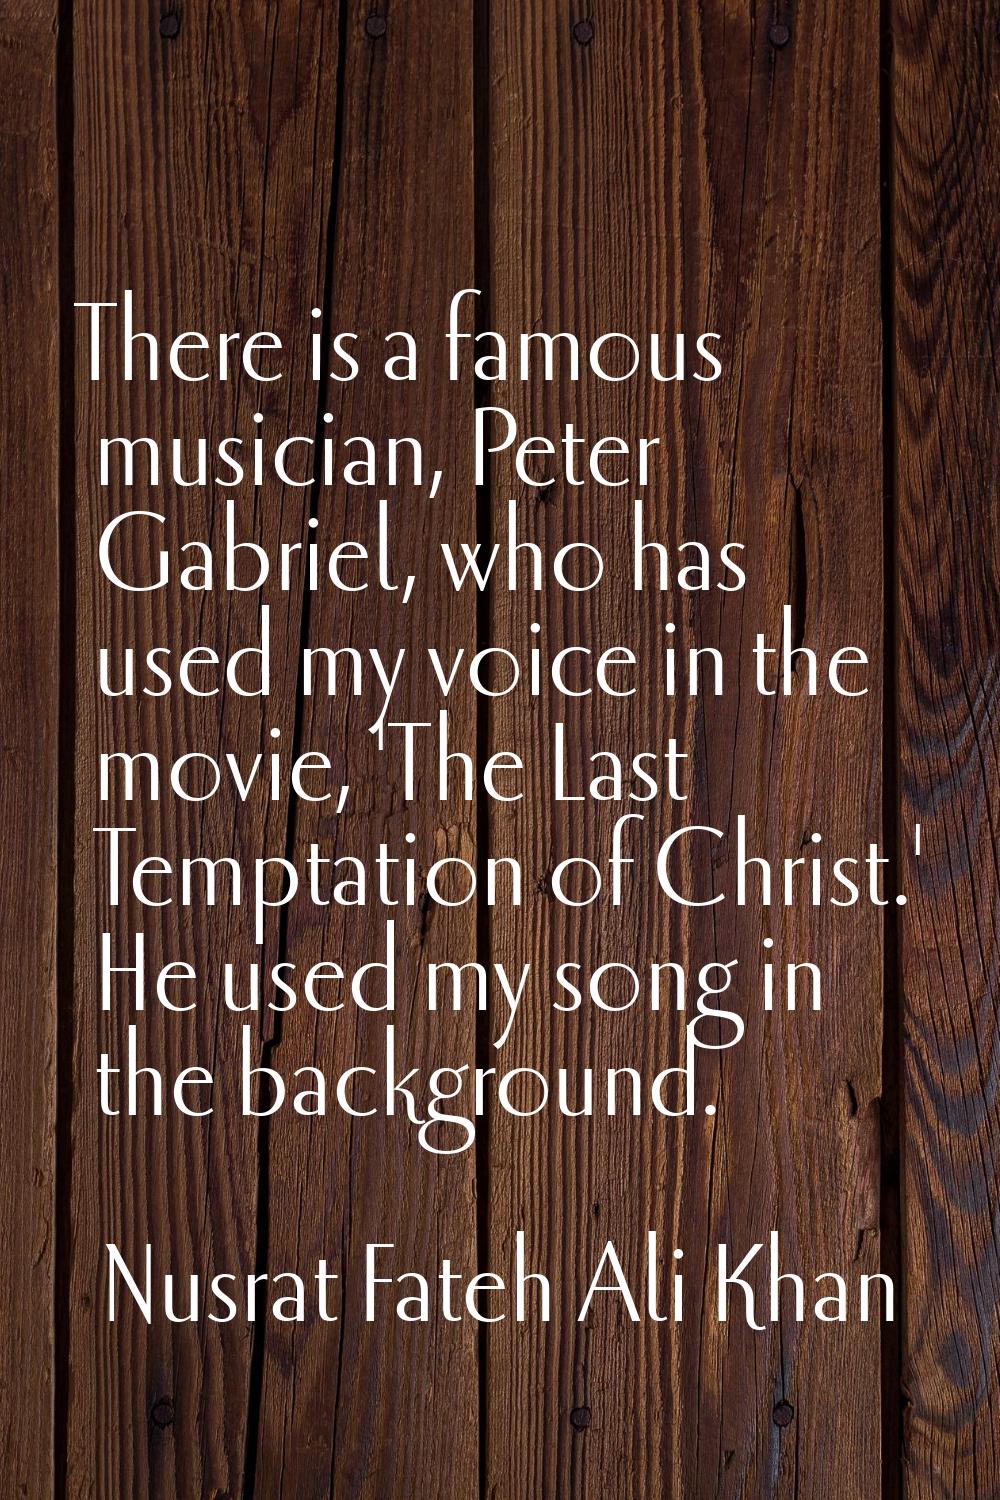 There is a famous musician, Peter Gabriel, who has used my voice in the movie, 'The Last Temptation